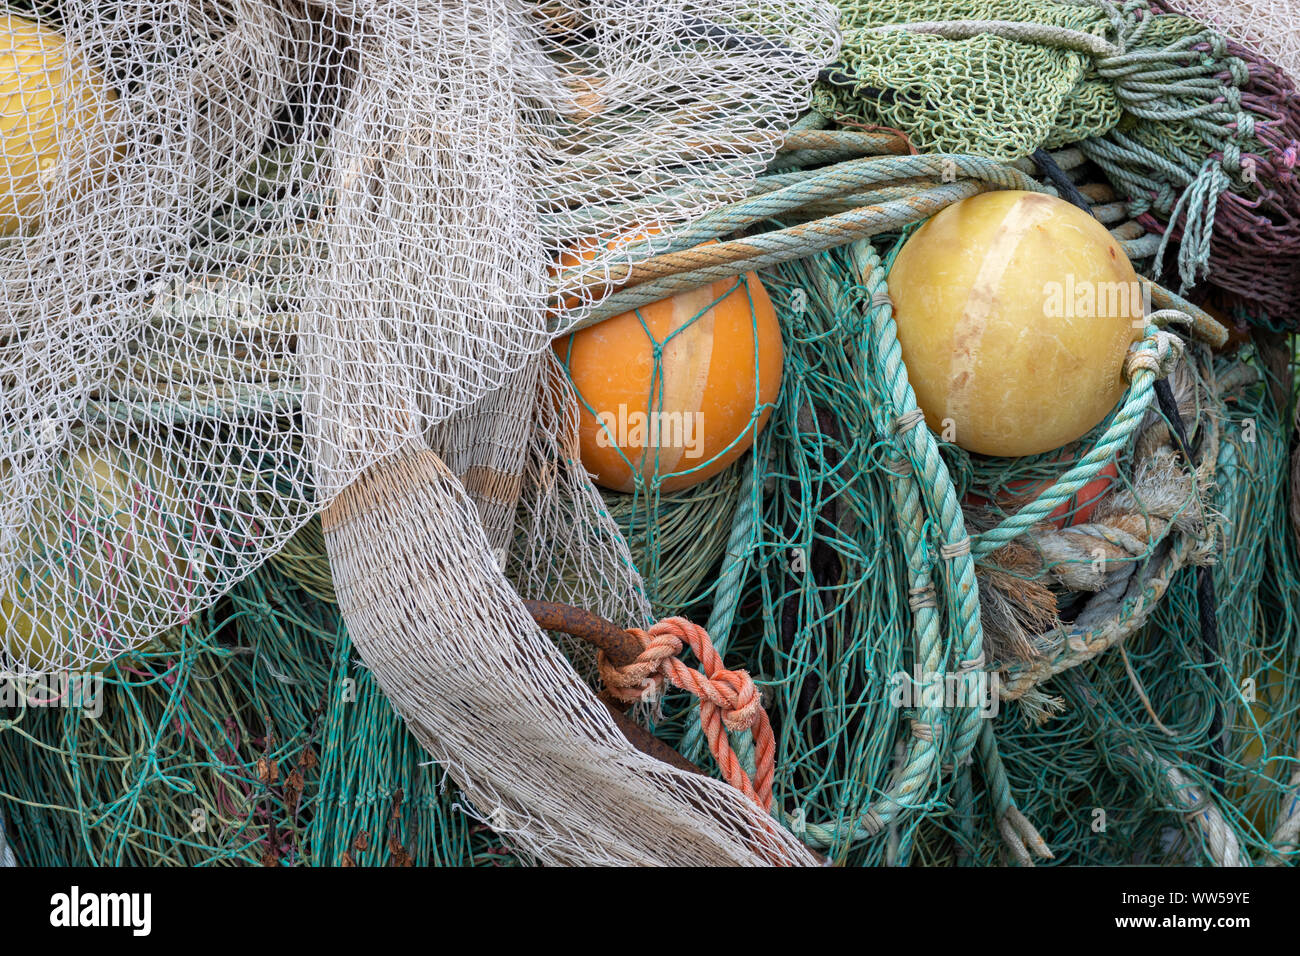 Old green and grey fishernet and other fishermens equipment, yellow and orange lifting bowls Stock Photo